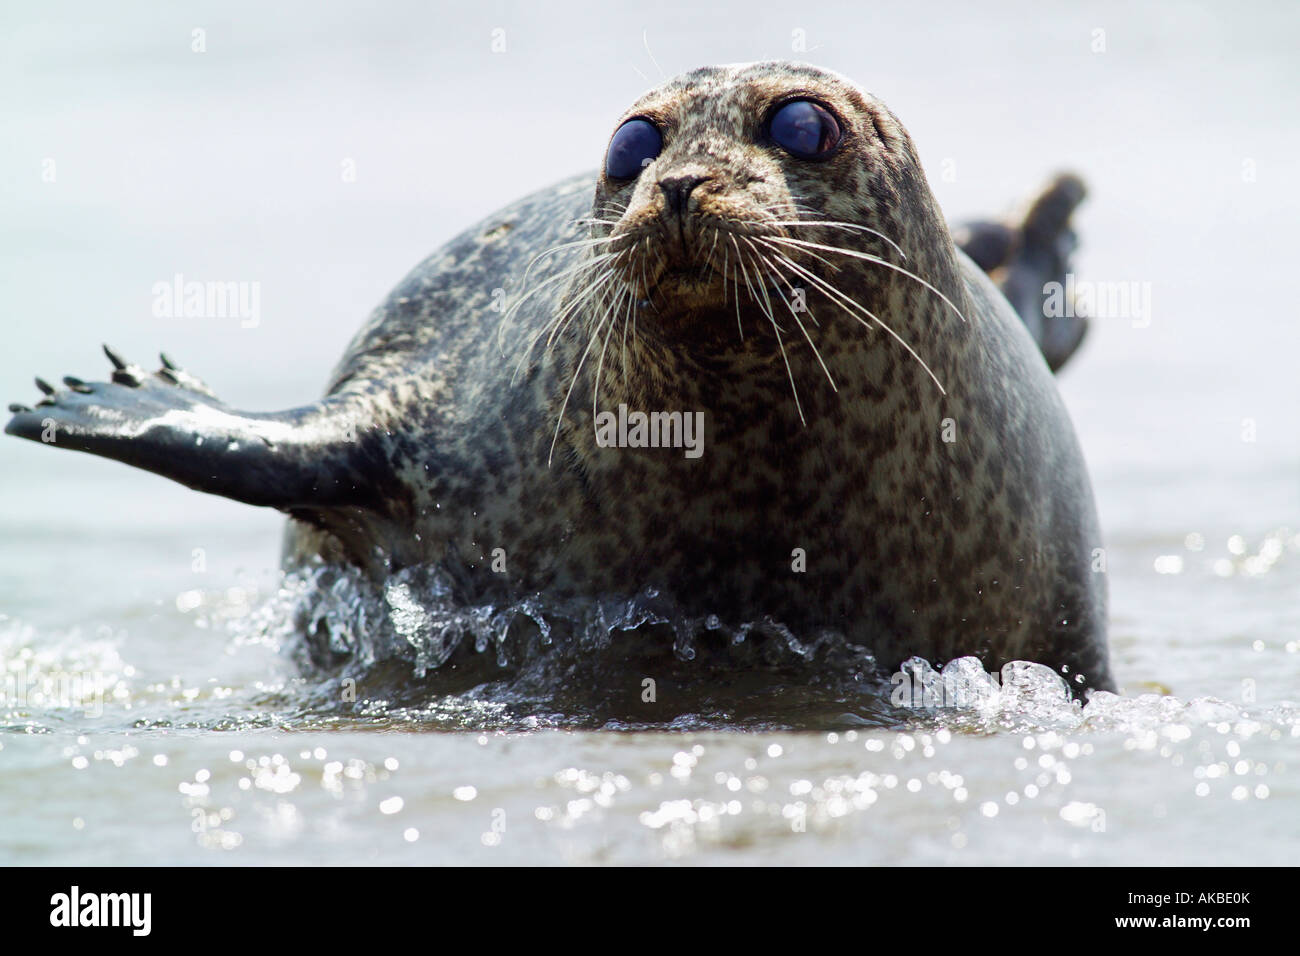 Seal lying in shallow water Stock Photo